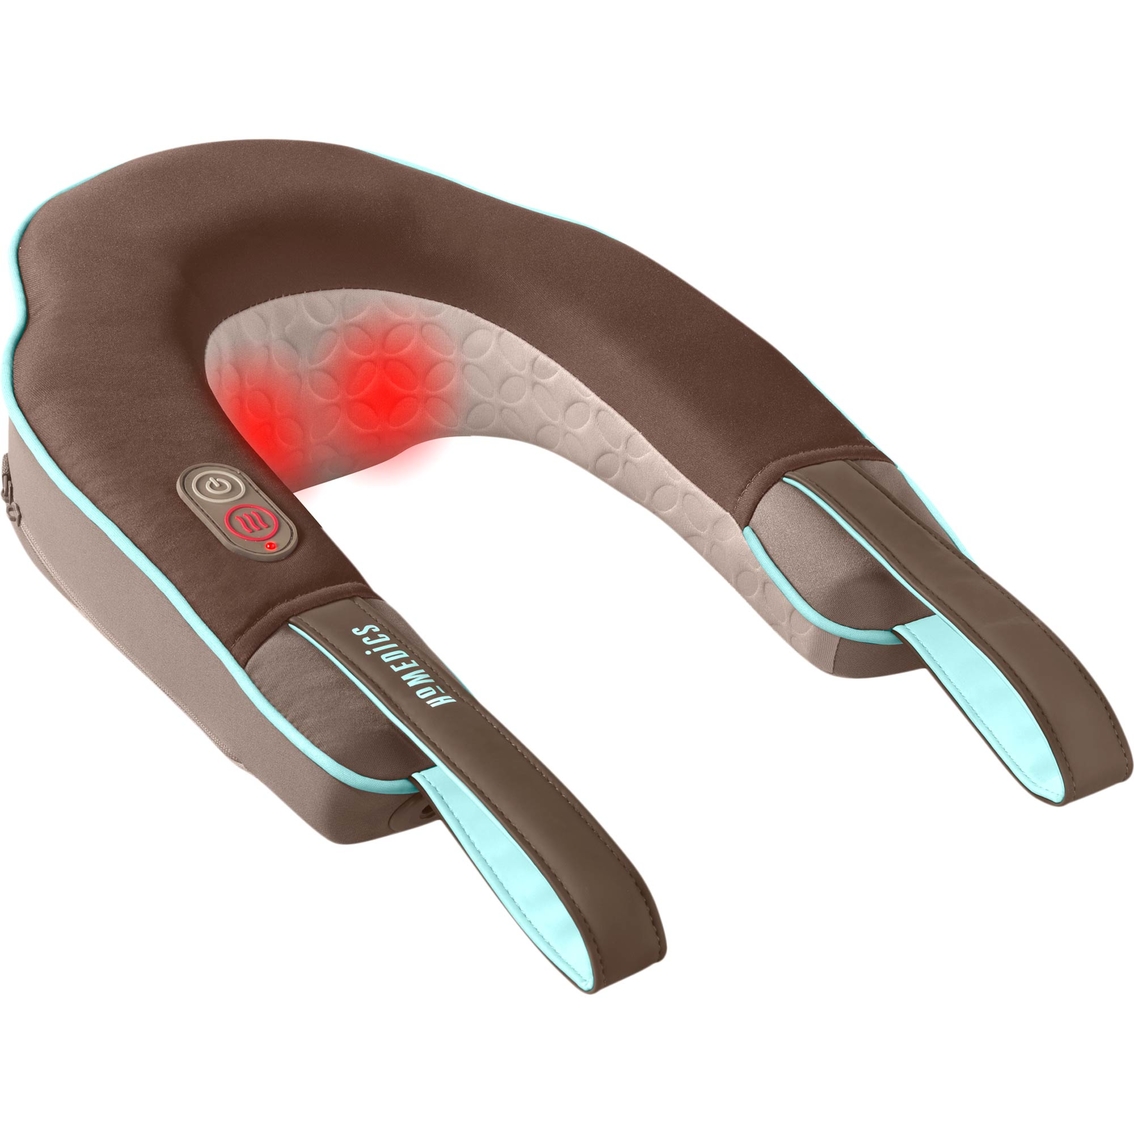 HoMedics Pro Therapy - Vibration Neck Massager with Heat NMSQ